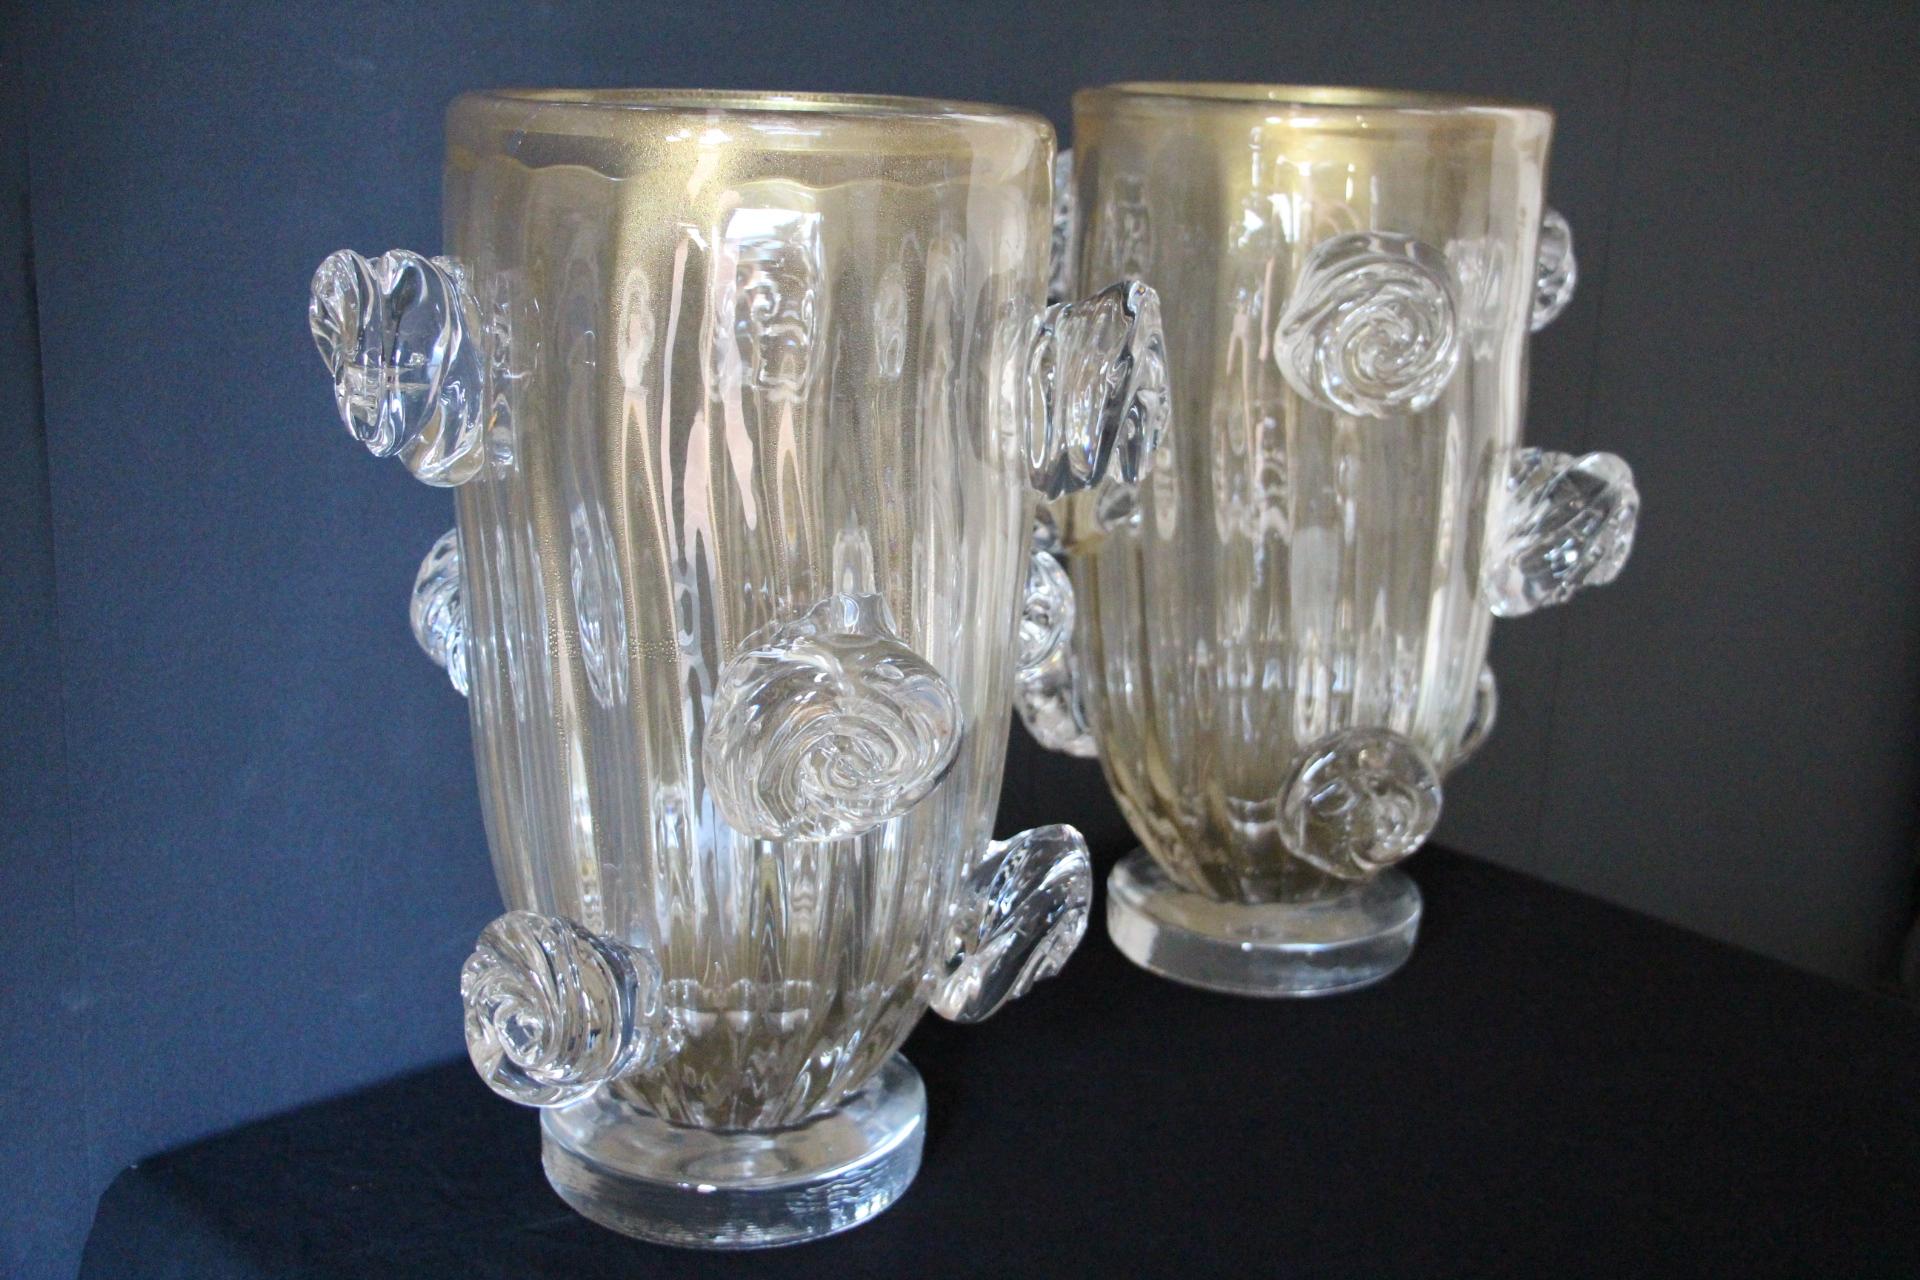 Italian Pair of Large Golden Murano Glass Vases With Roses Decor by Costantini For Sale